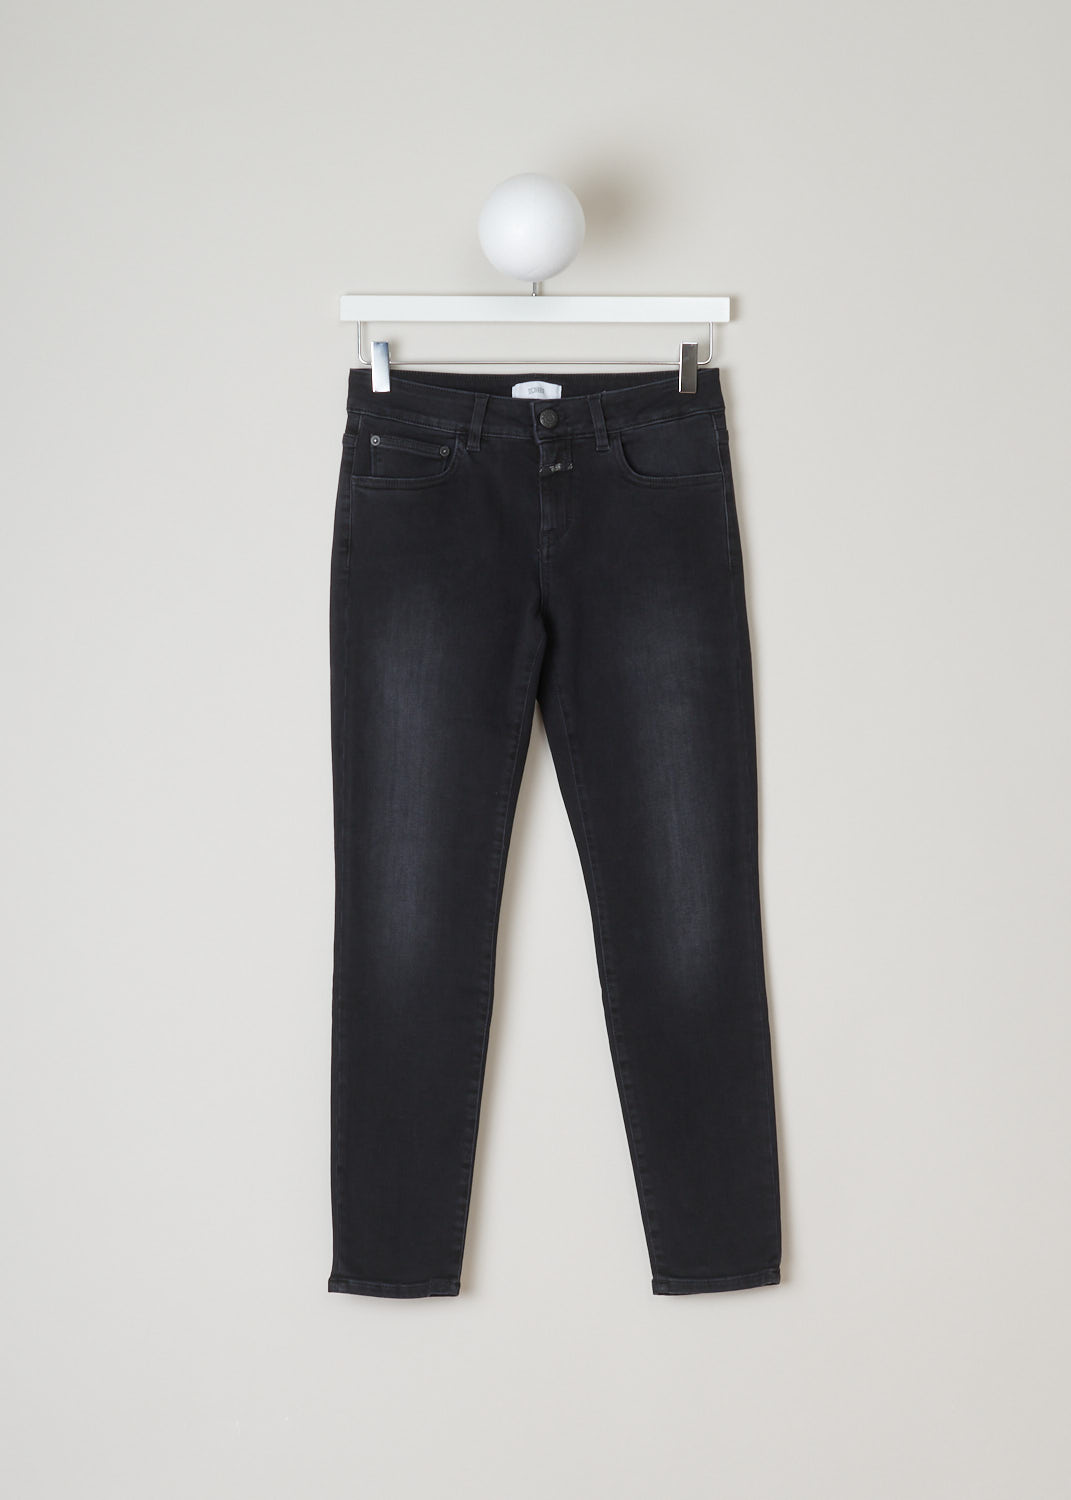 Closed, Slim-fit mid-waist black jeans, baker_C91833_0E3BL_bl, black, front, Mid-waist slim-fit jeans made with cropped leg length. Comes with the traditional 5 pockets. As closure options this model had one button and concealed zipper.